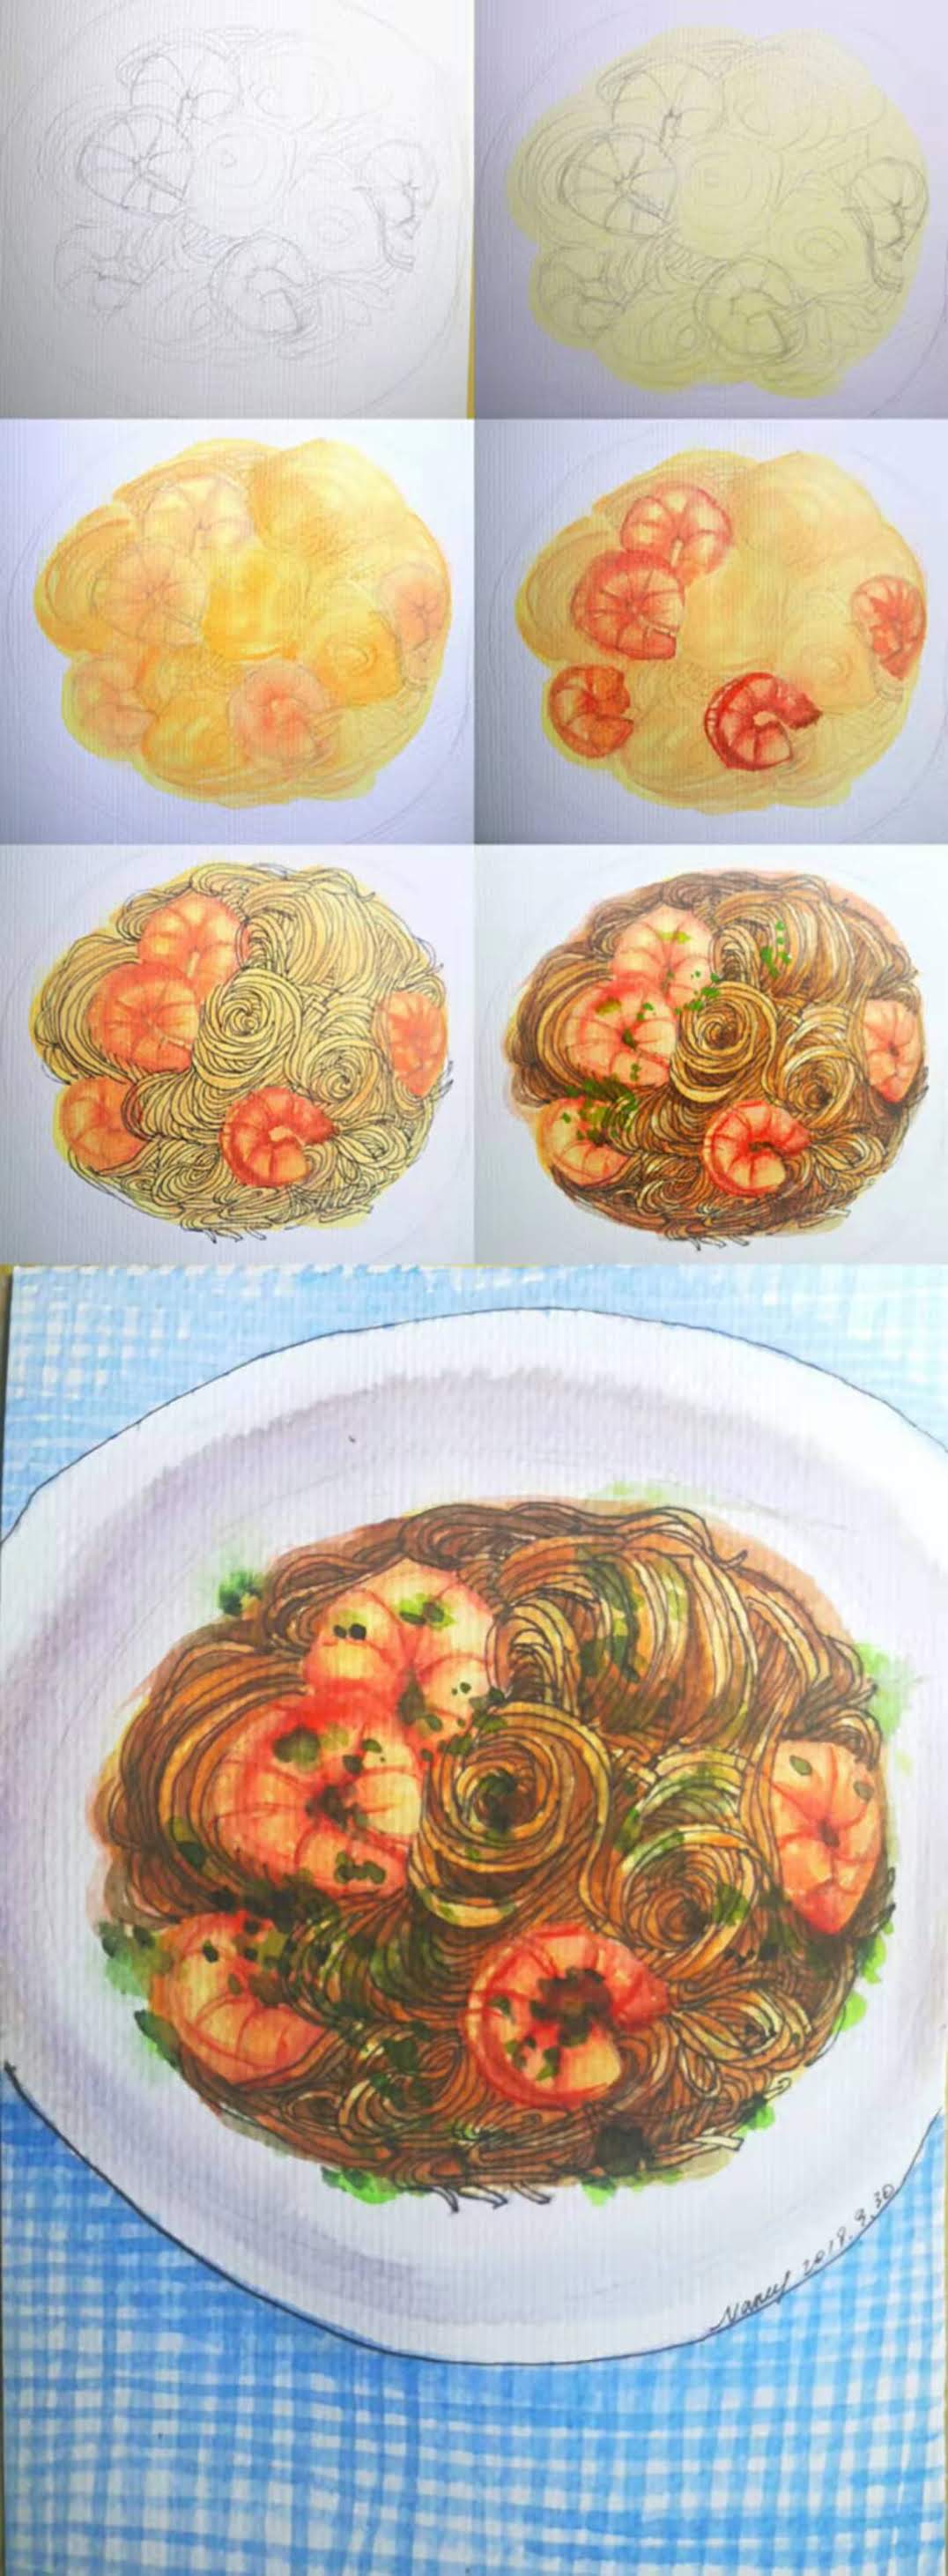 How to draw prawn fried noodles in watercolor step by step tutorial